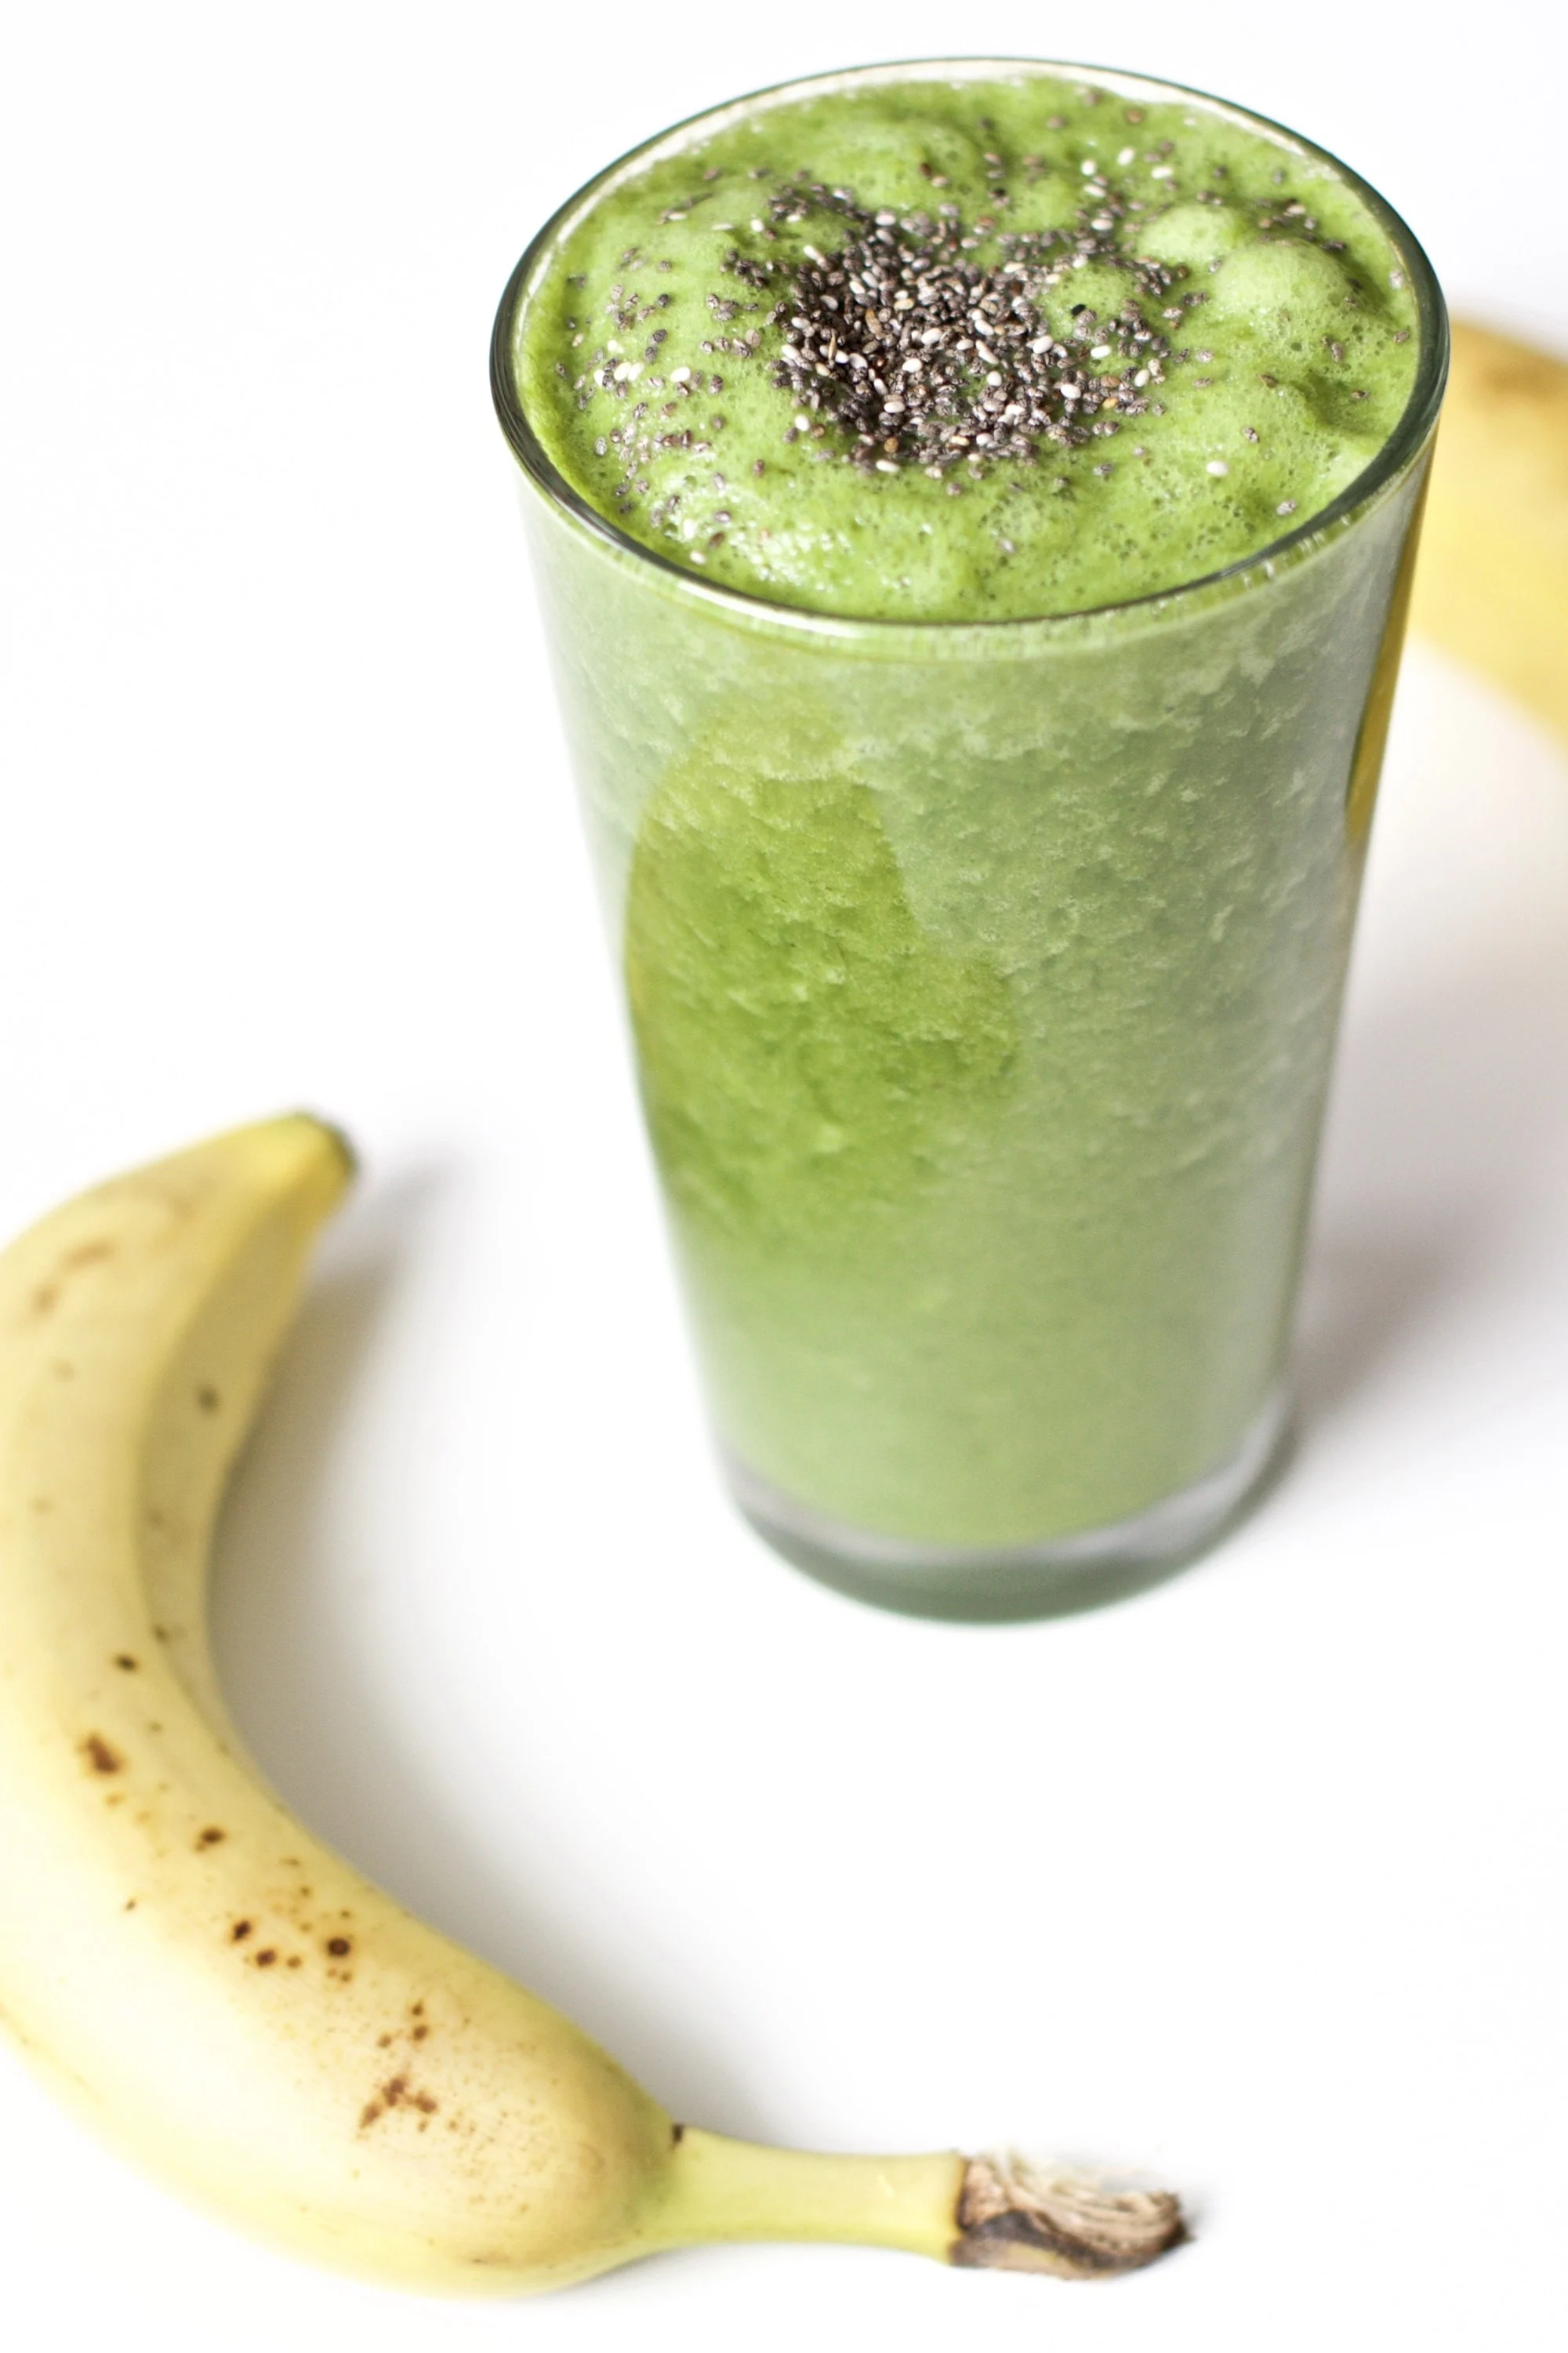 Sometimes you need your morning caffeine kick, other days you need something fresh like one of these green smoothie recipes to kick start your day! Green Smoothie | Healthy Smoothie | Fruit Smoothie | Healthy | Women's Health | Green Smoothie Inspiration | Smoothie Recipe | Breakfast Smoothie | Summer Smoothie | Green Smoothie Recipe